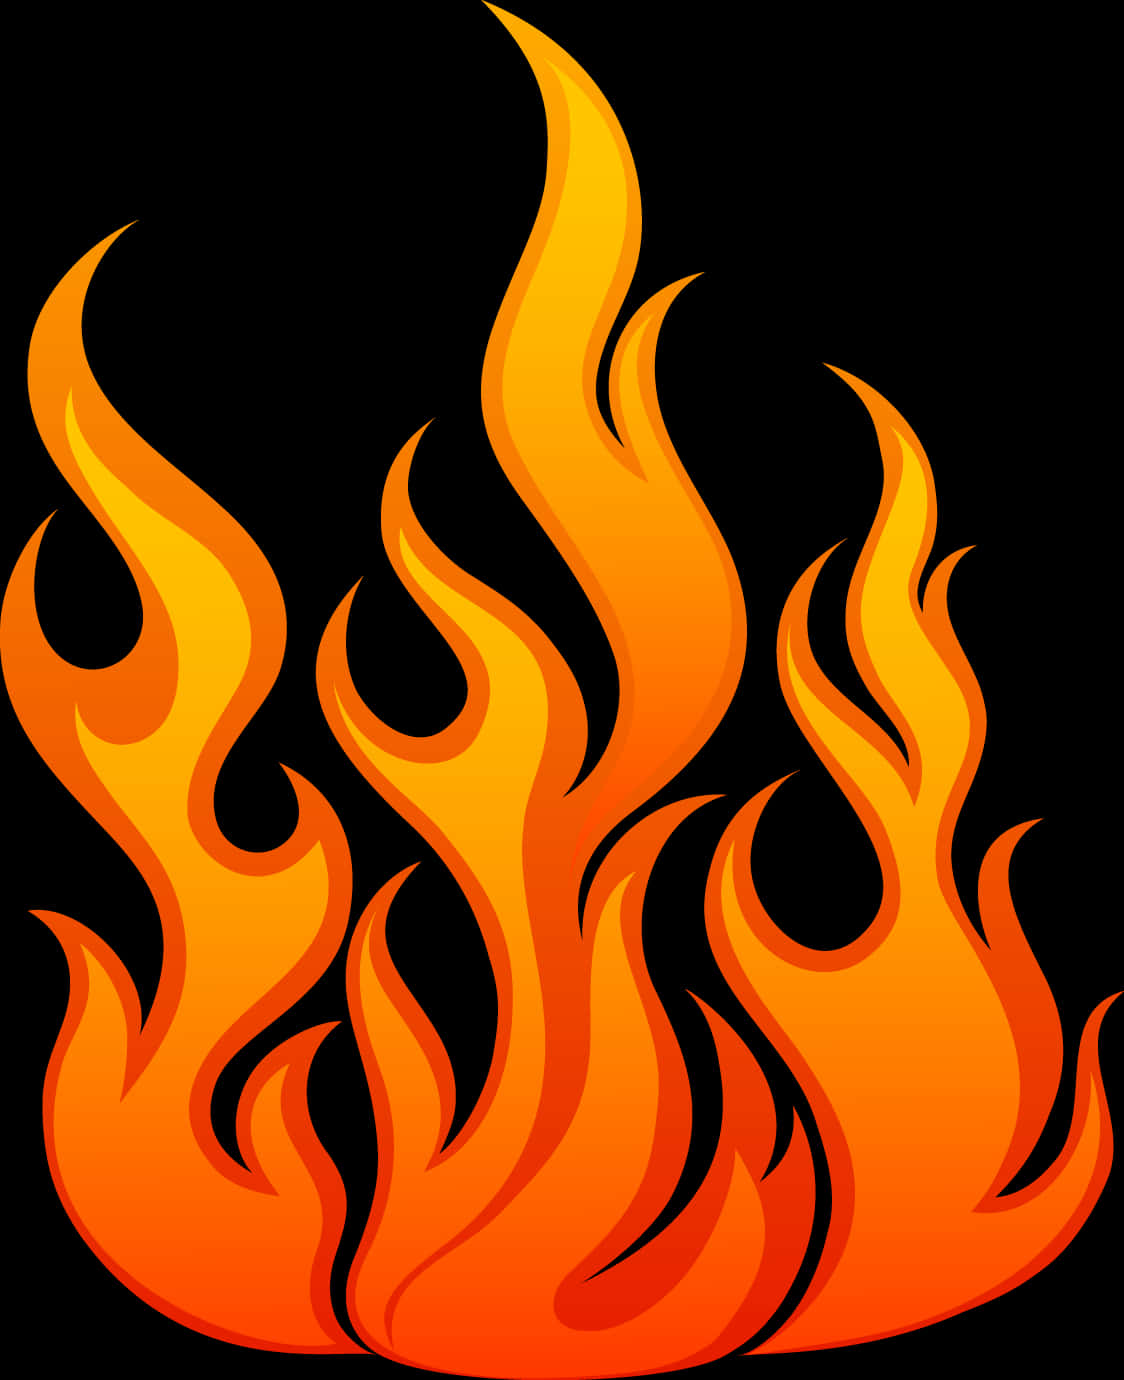 Vibrant Flame Graphic PNG